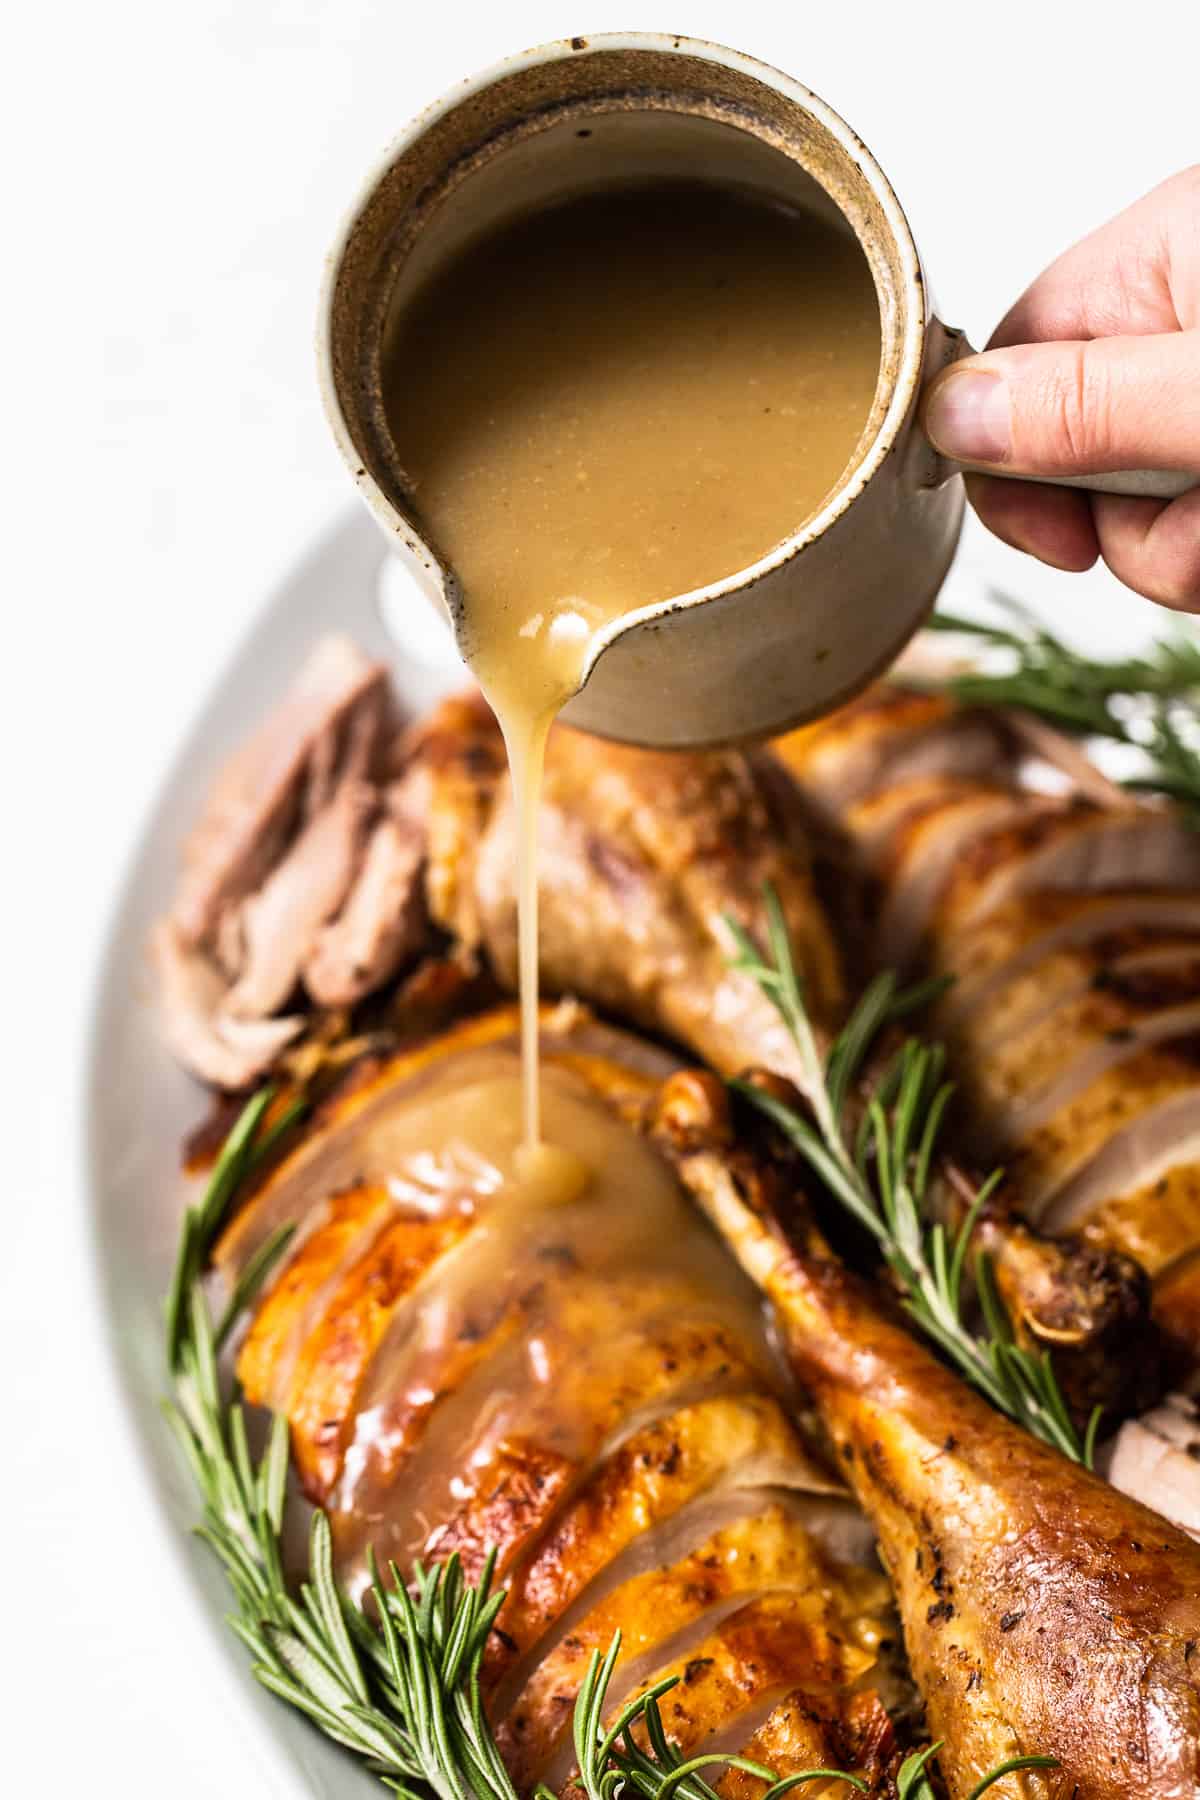 How to Make Turkey Gravy from Drippings